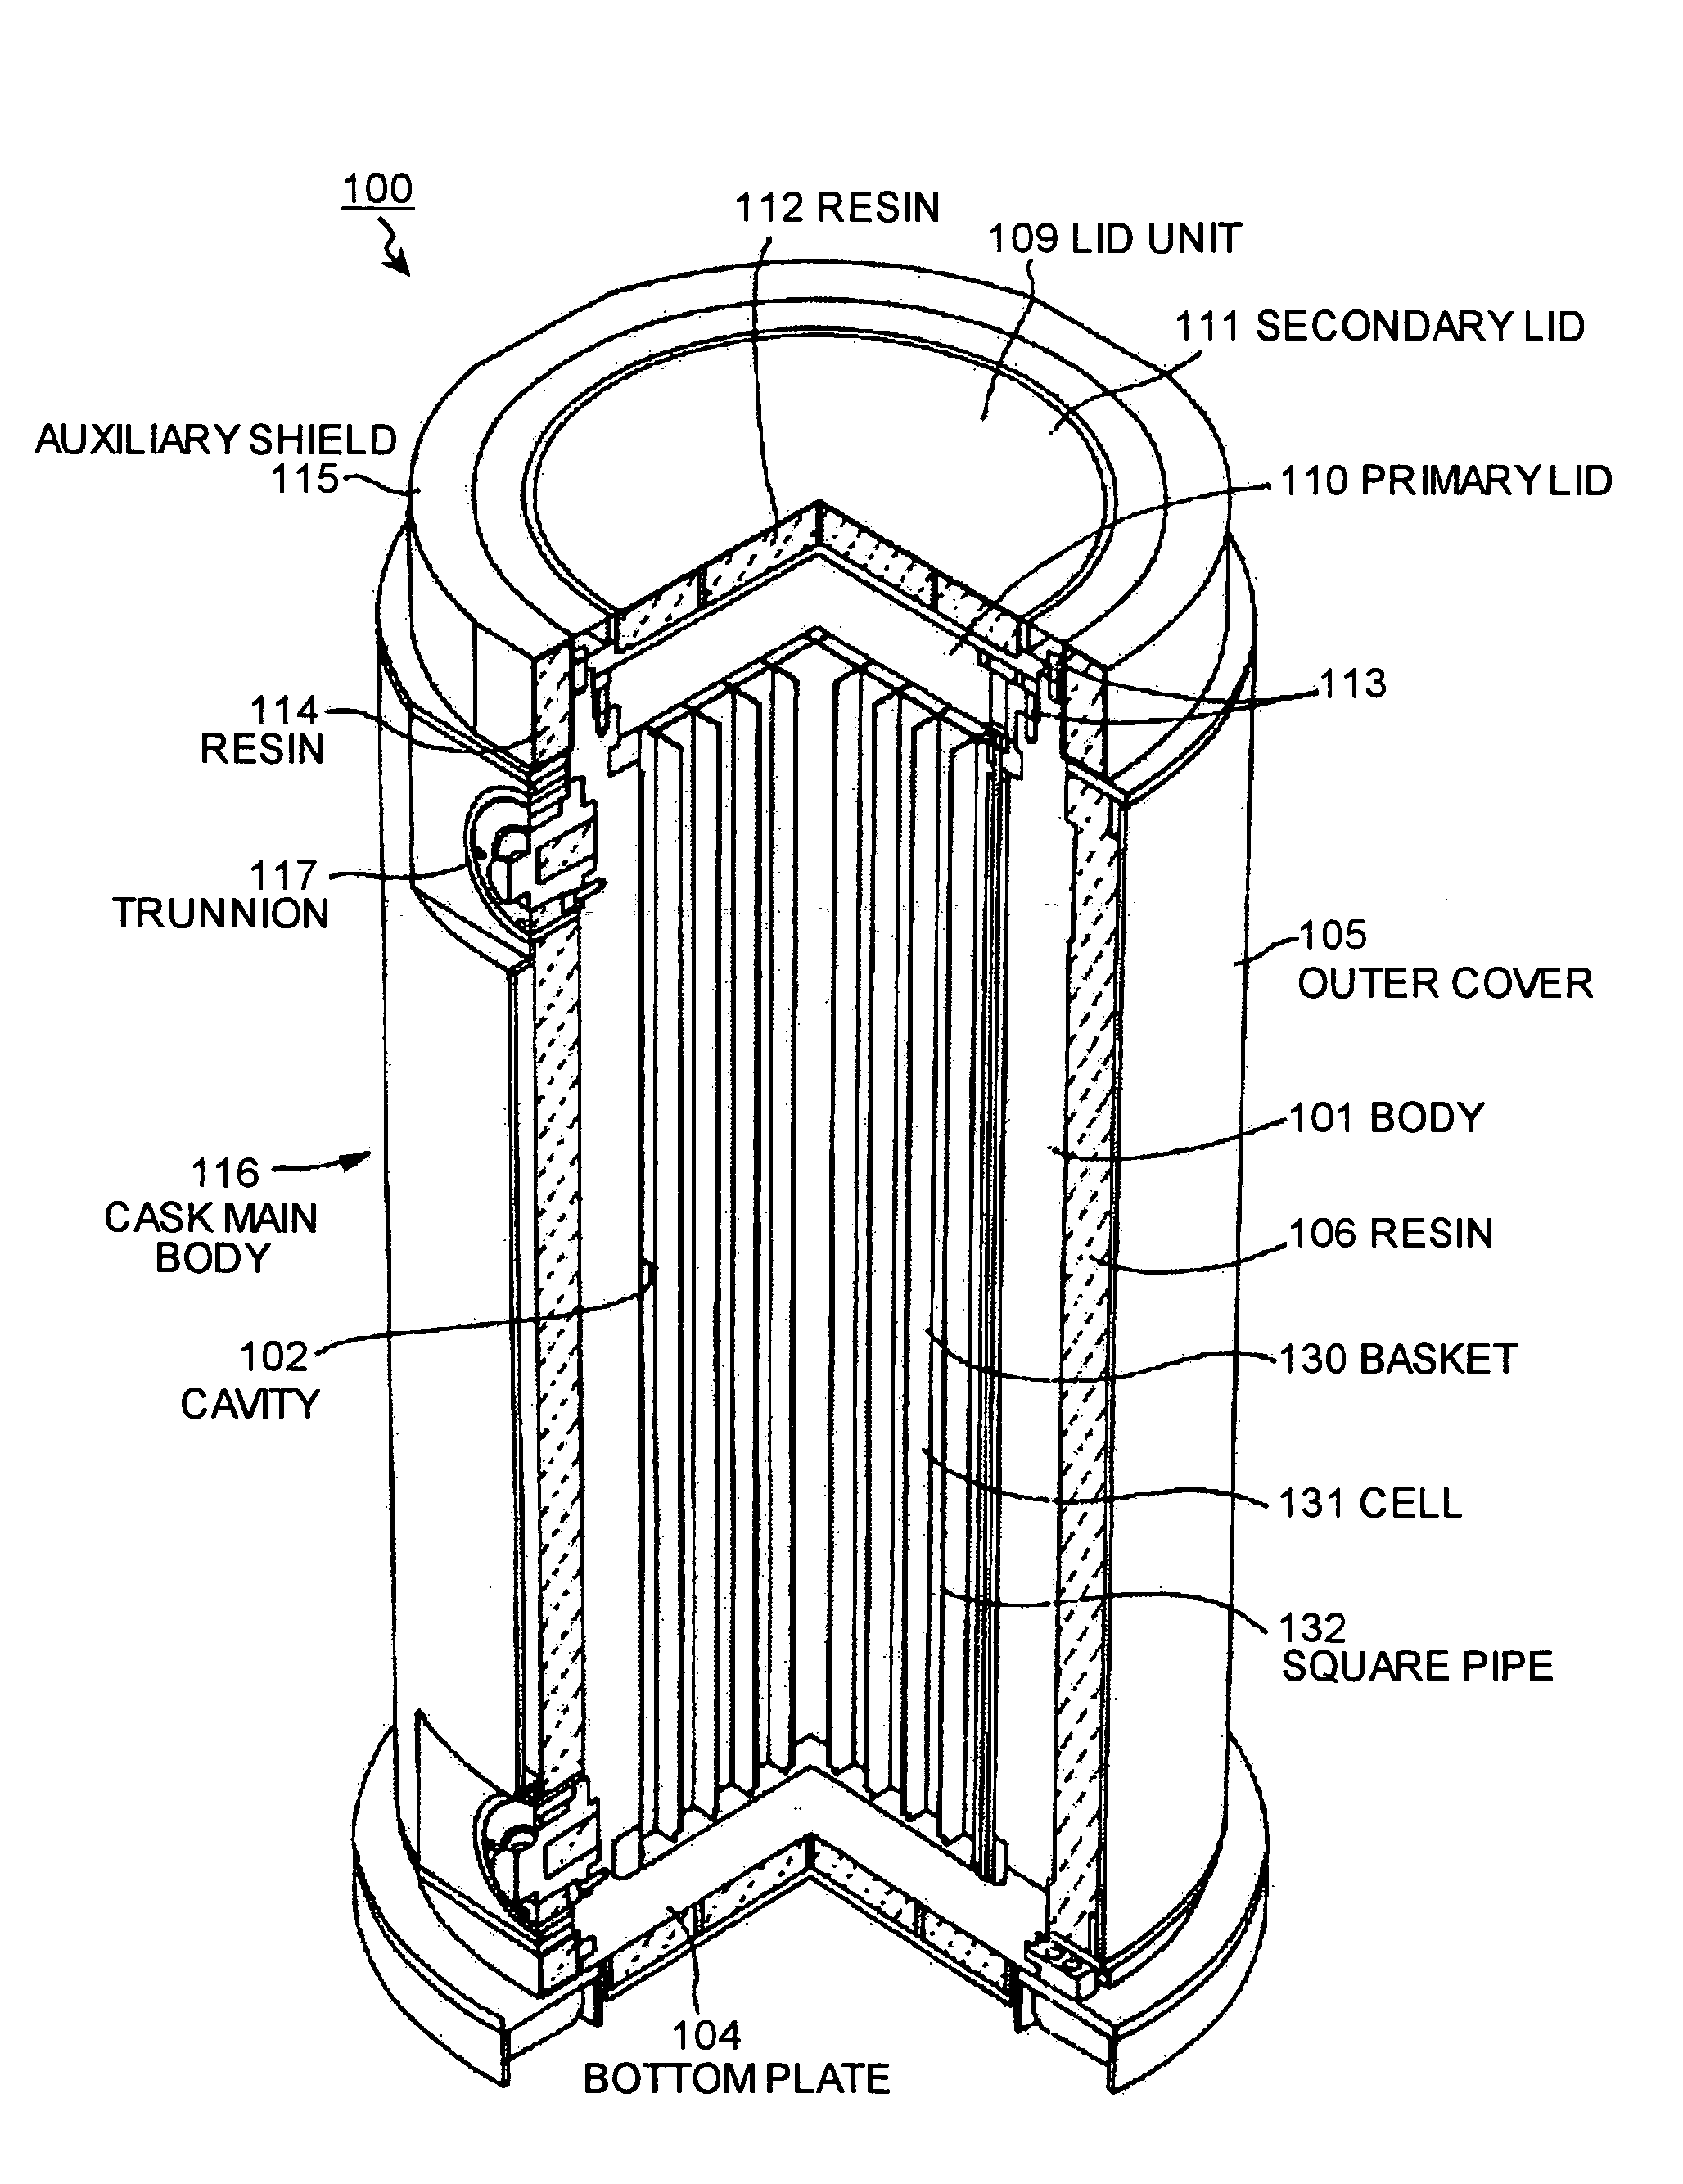 Cask, composition for neutron shielding body, and method of manufacturing the neutron shielding body